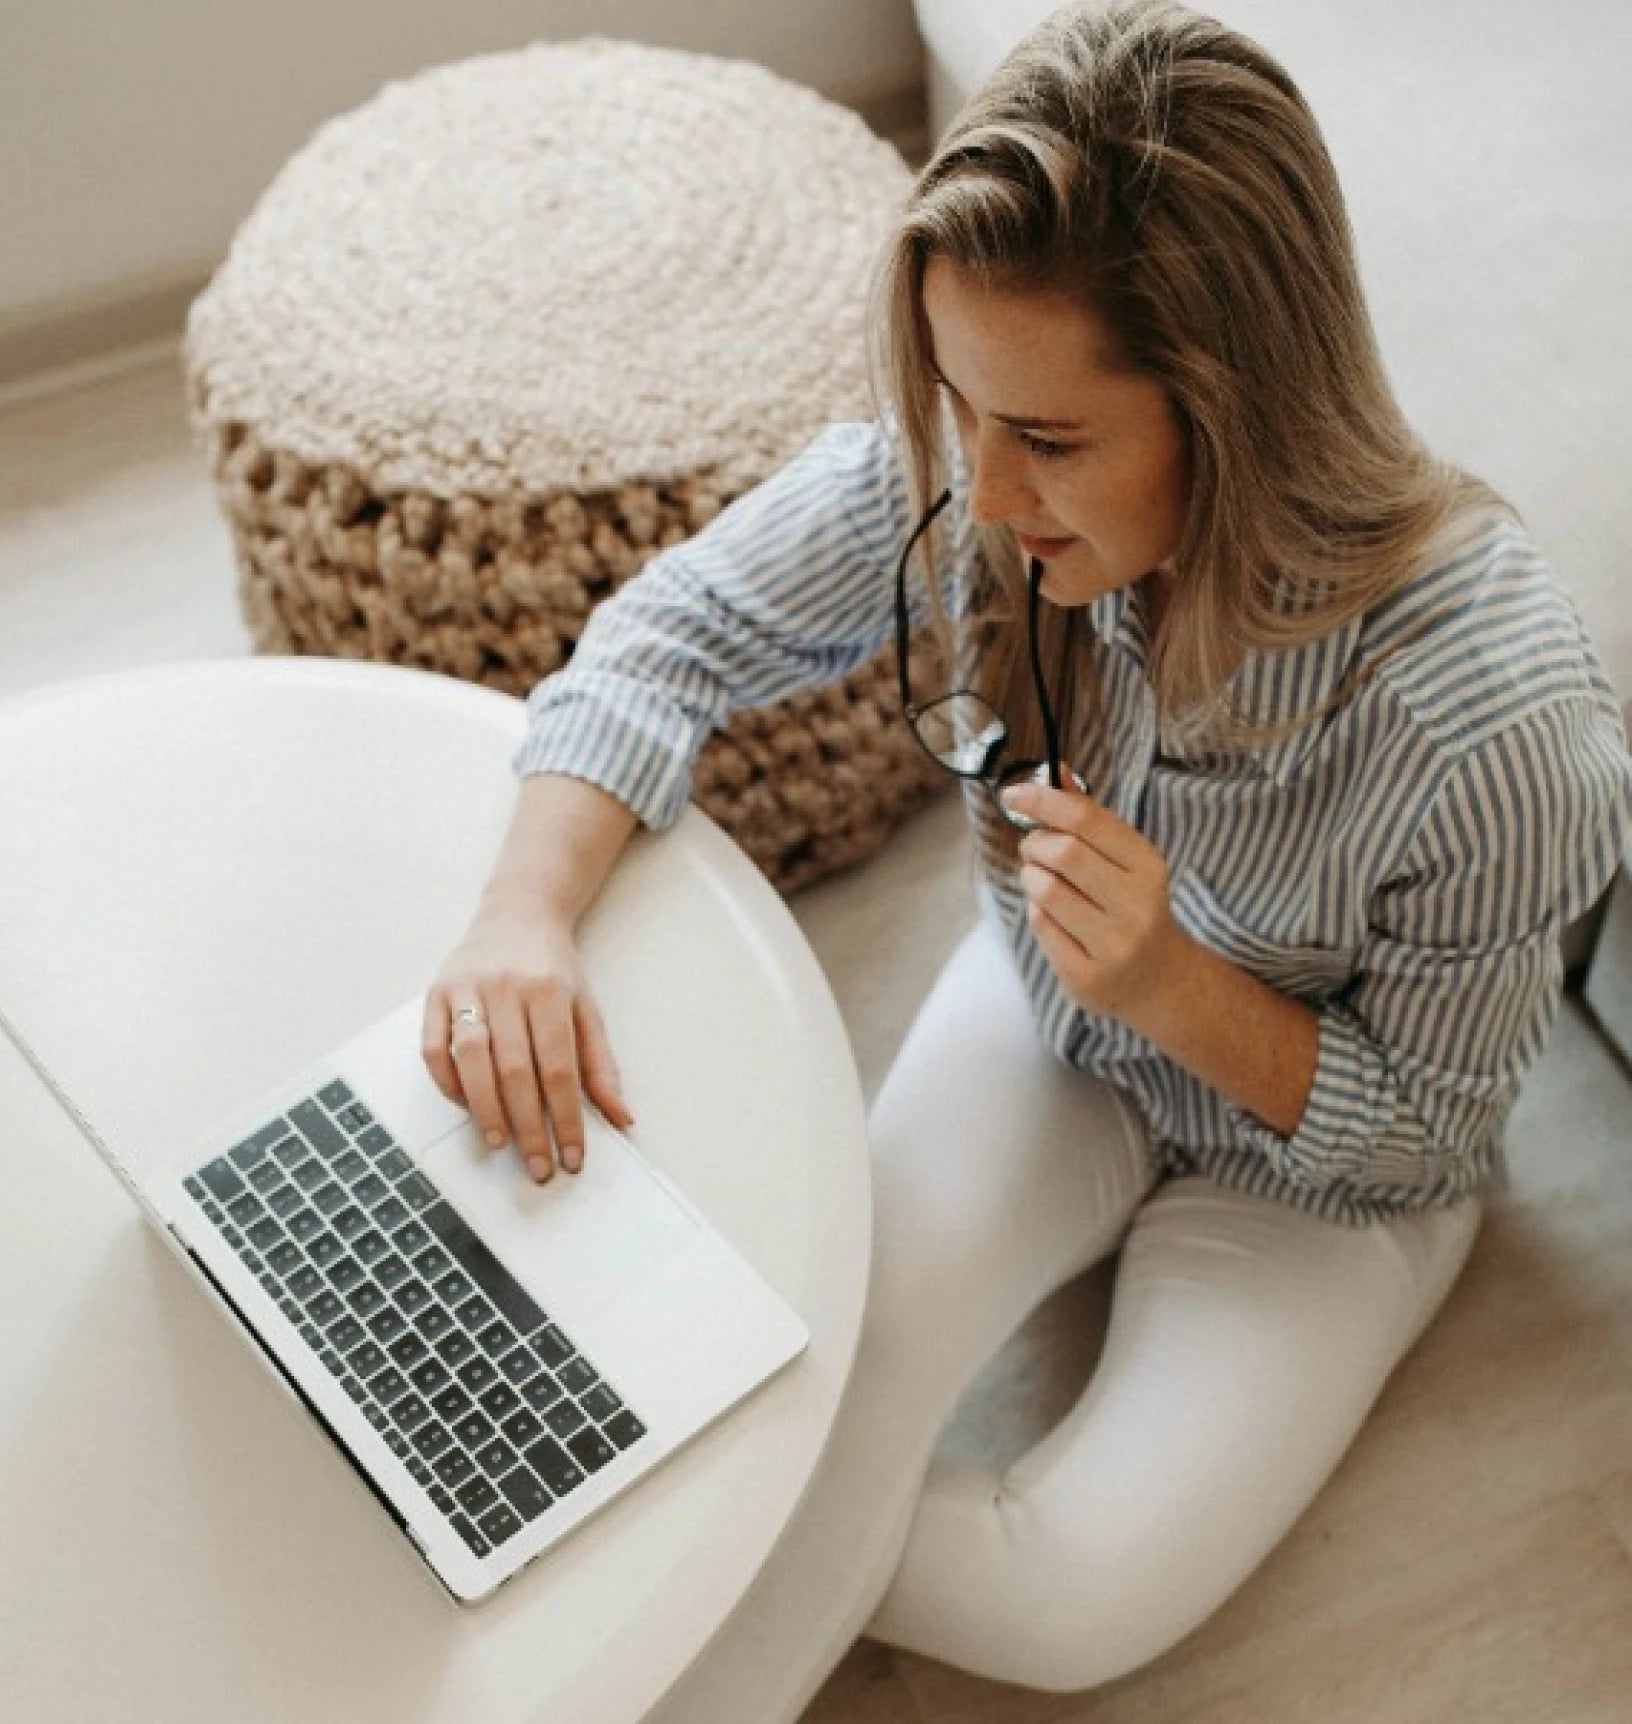 Woman sitting and working on a laptop, holding glasses in hand.